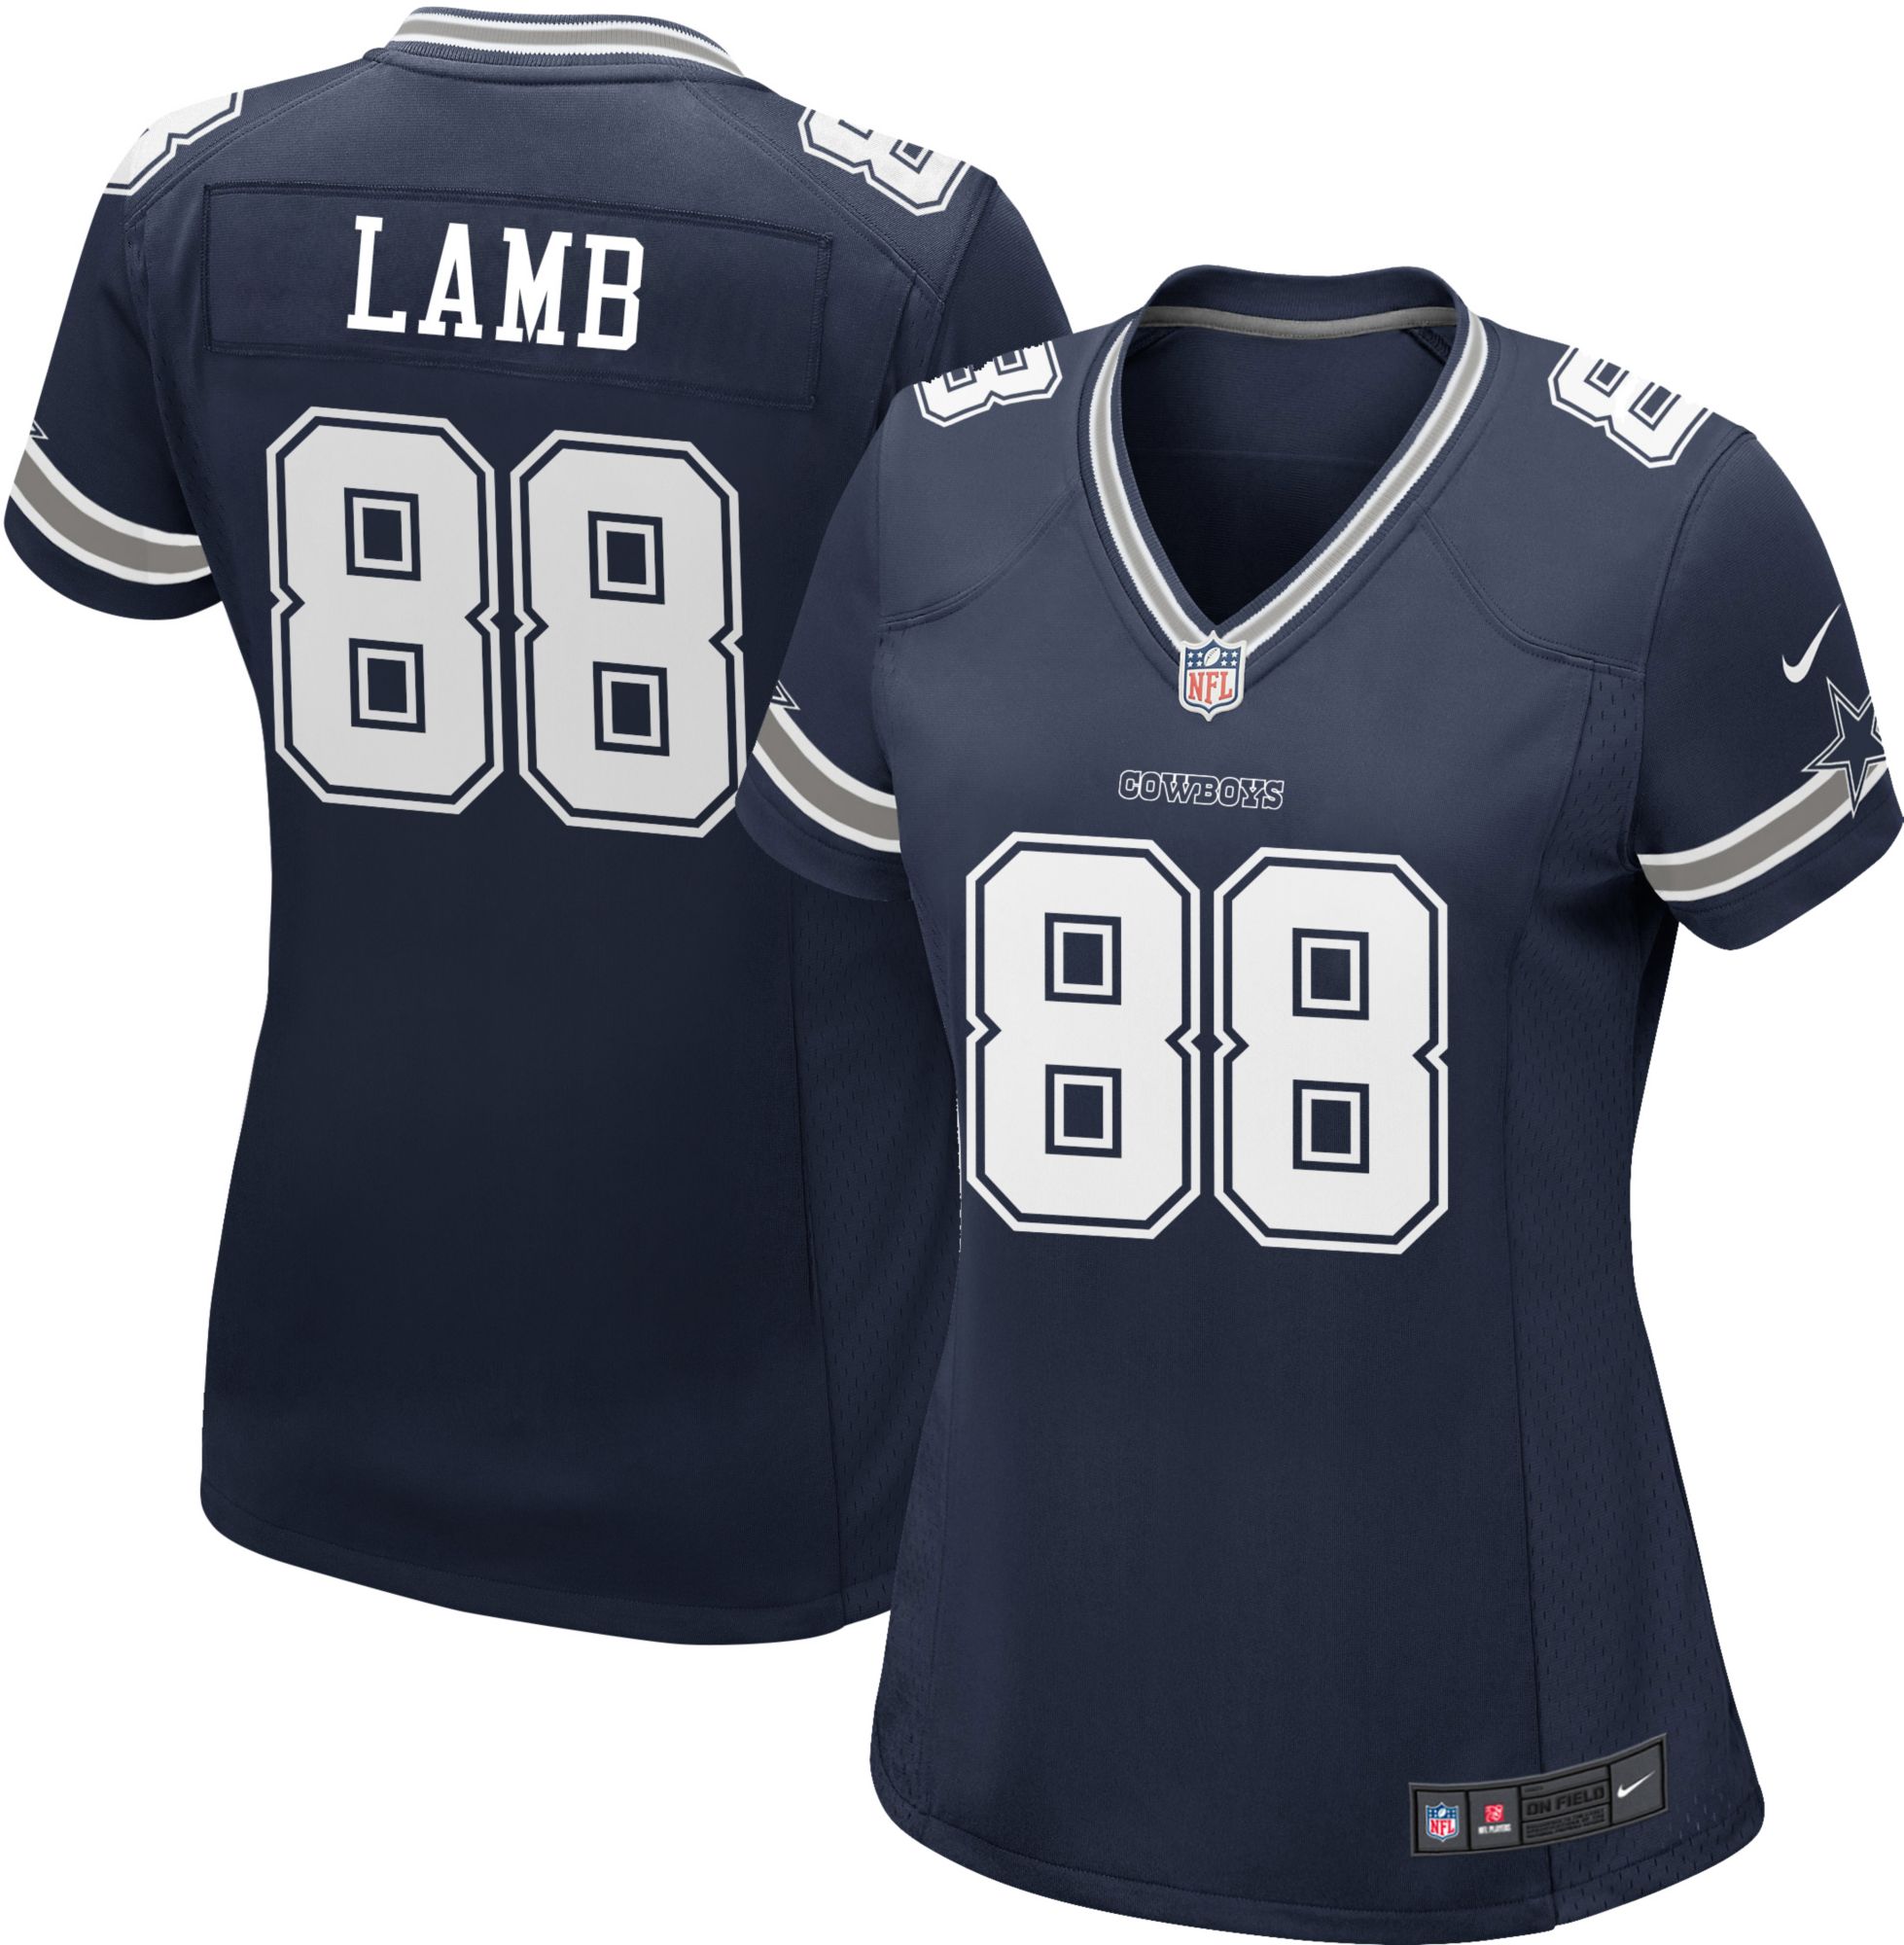 black and gold cowboys jersey